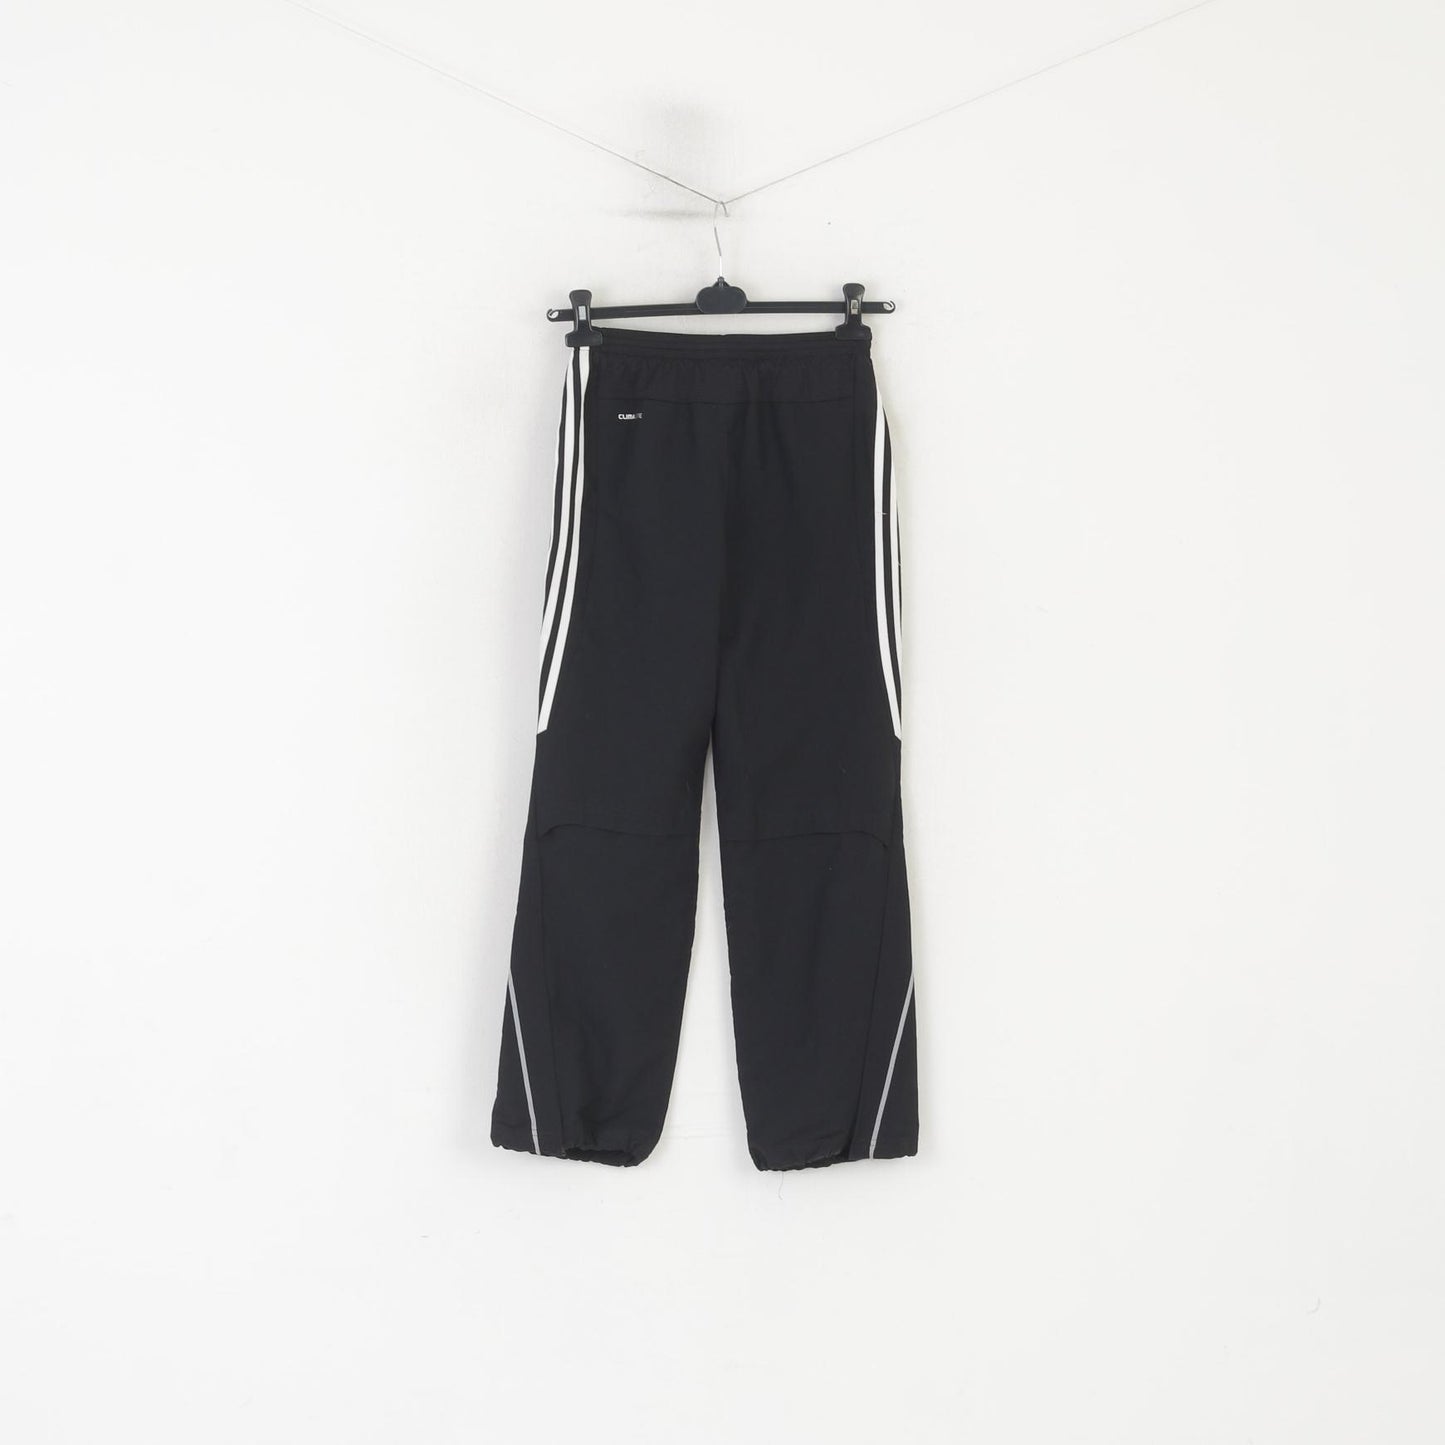 Adidas Boys 152 12 Age Trousers Black Polyester Climalite Active Sweatpants